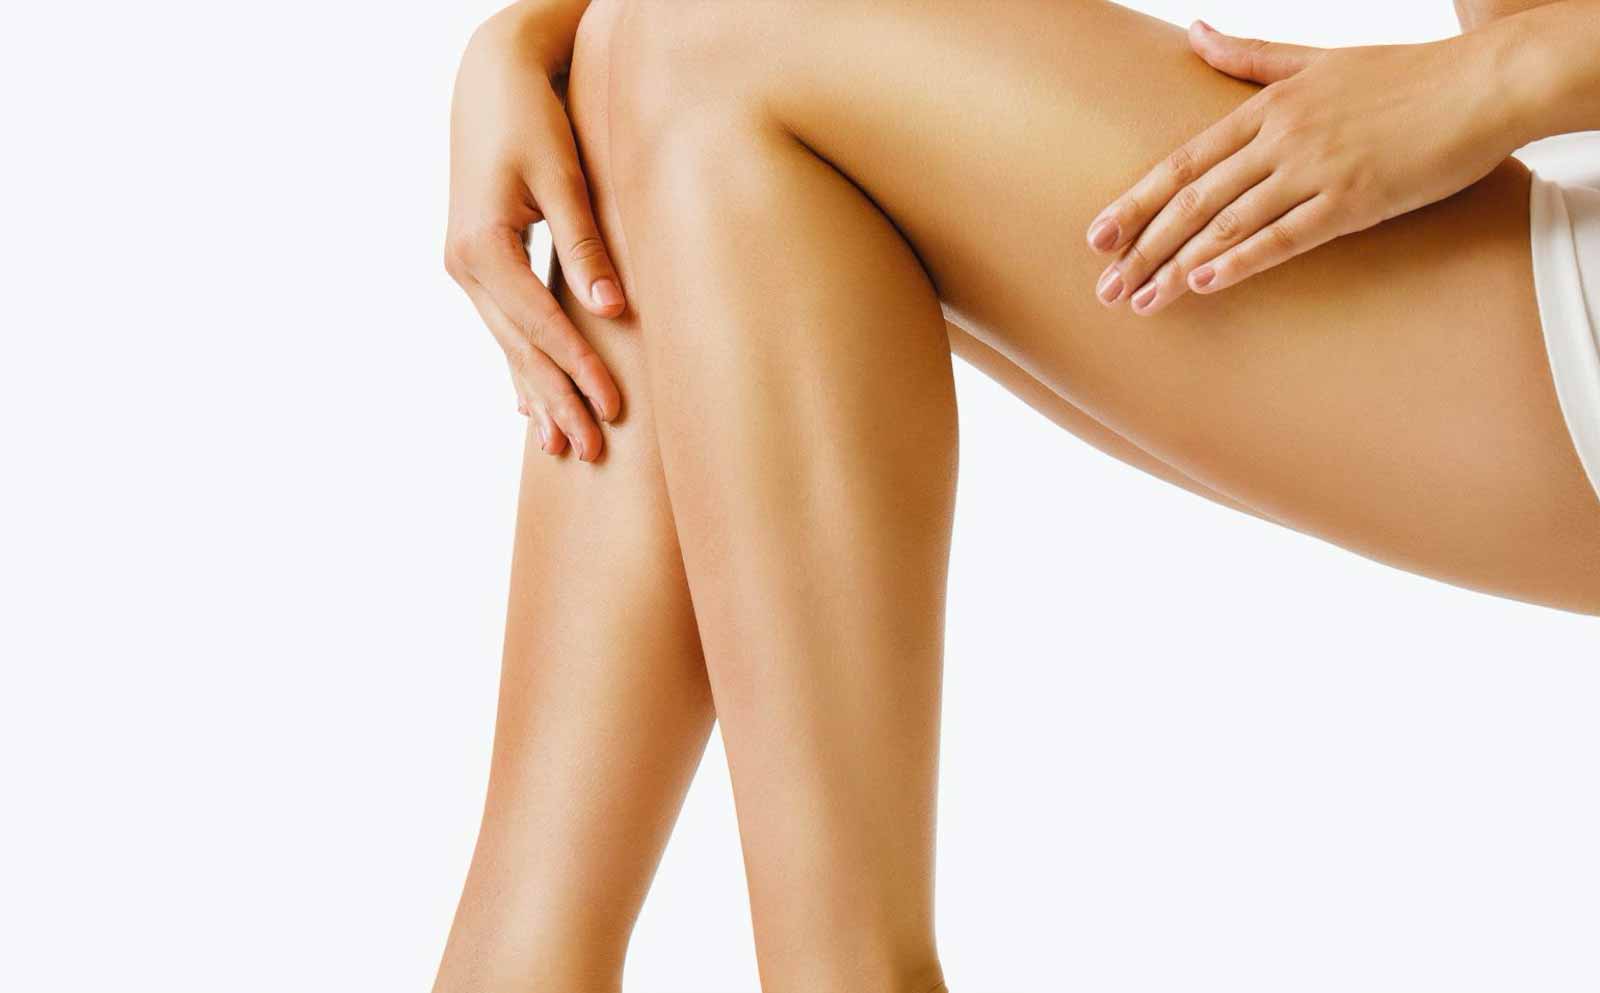 What Are The Symptoms, Causes, And Risk Factors Of Cellulite